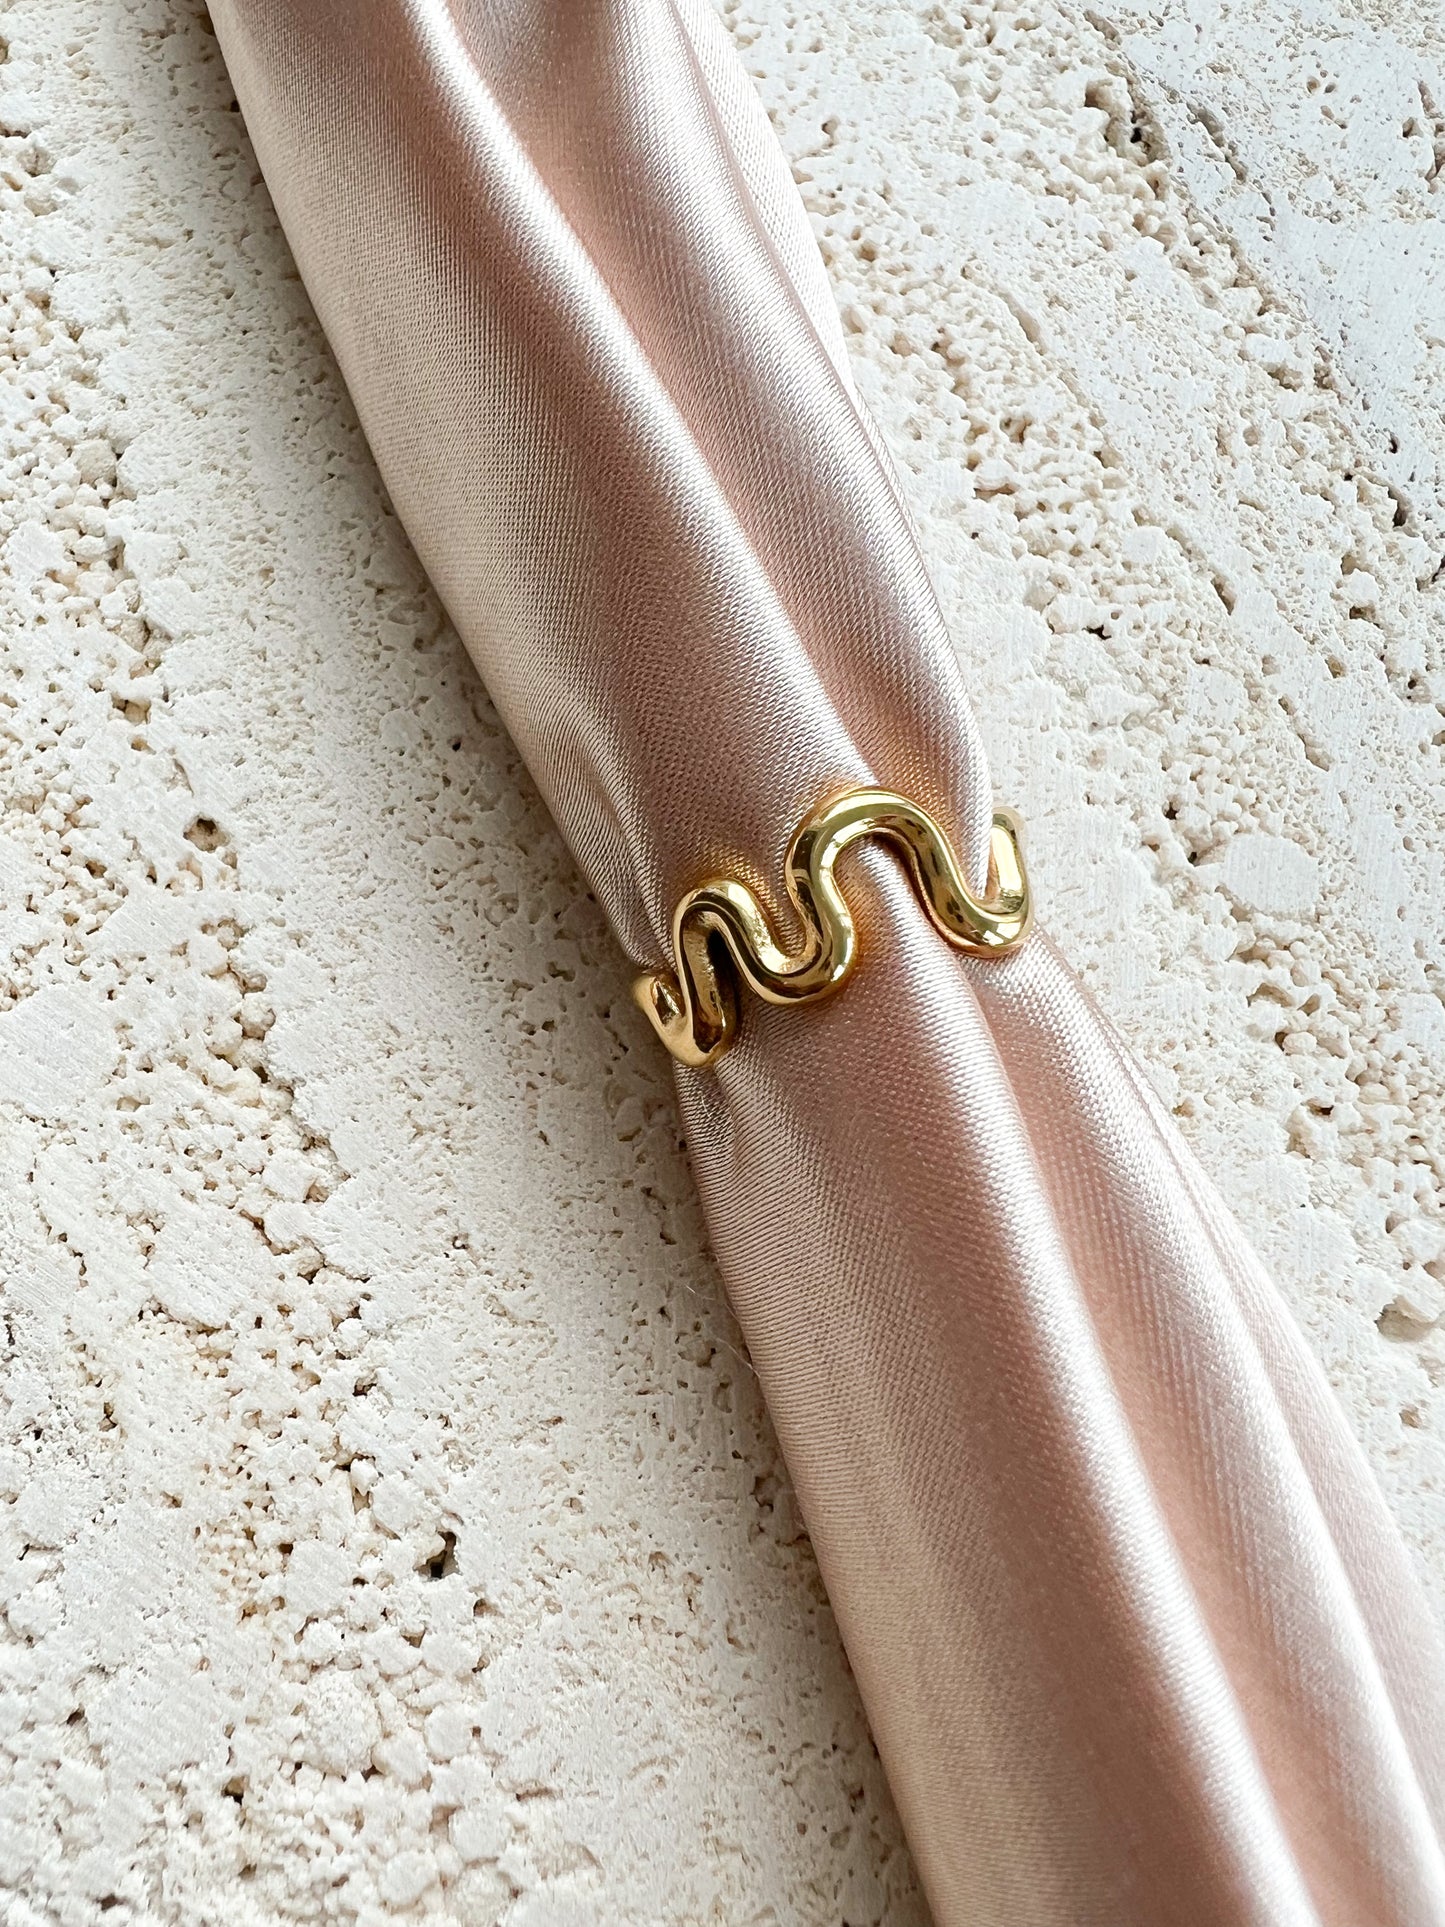 Squiggly Gold Ring